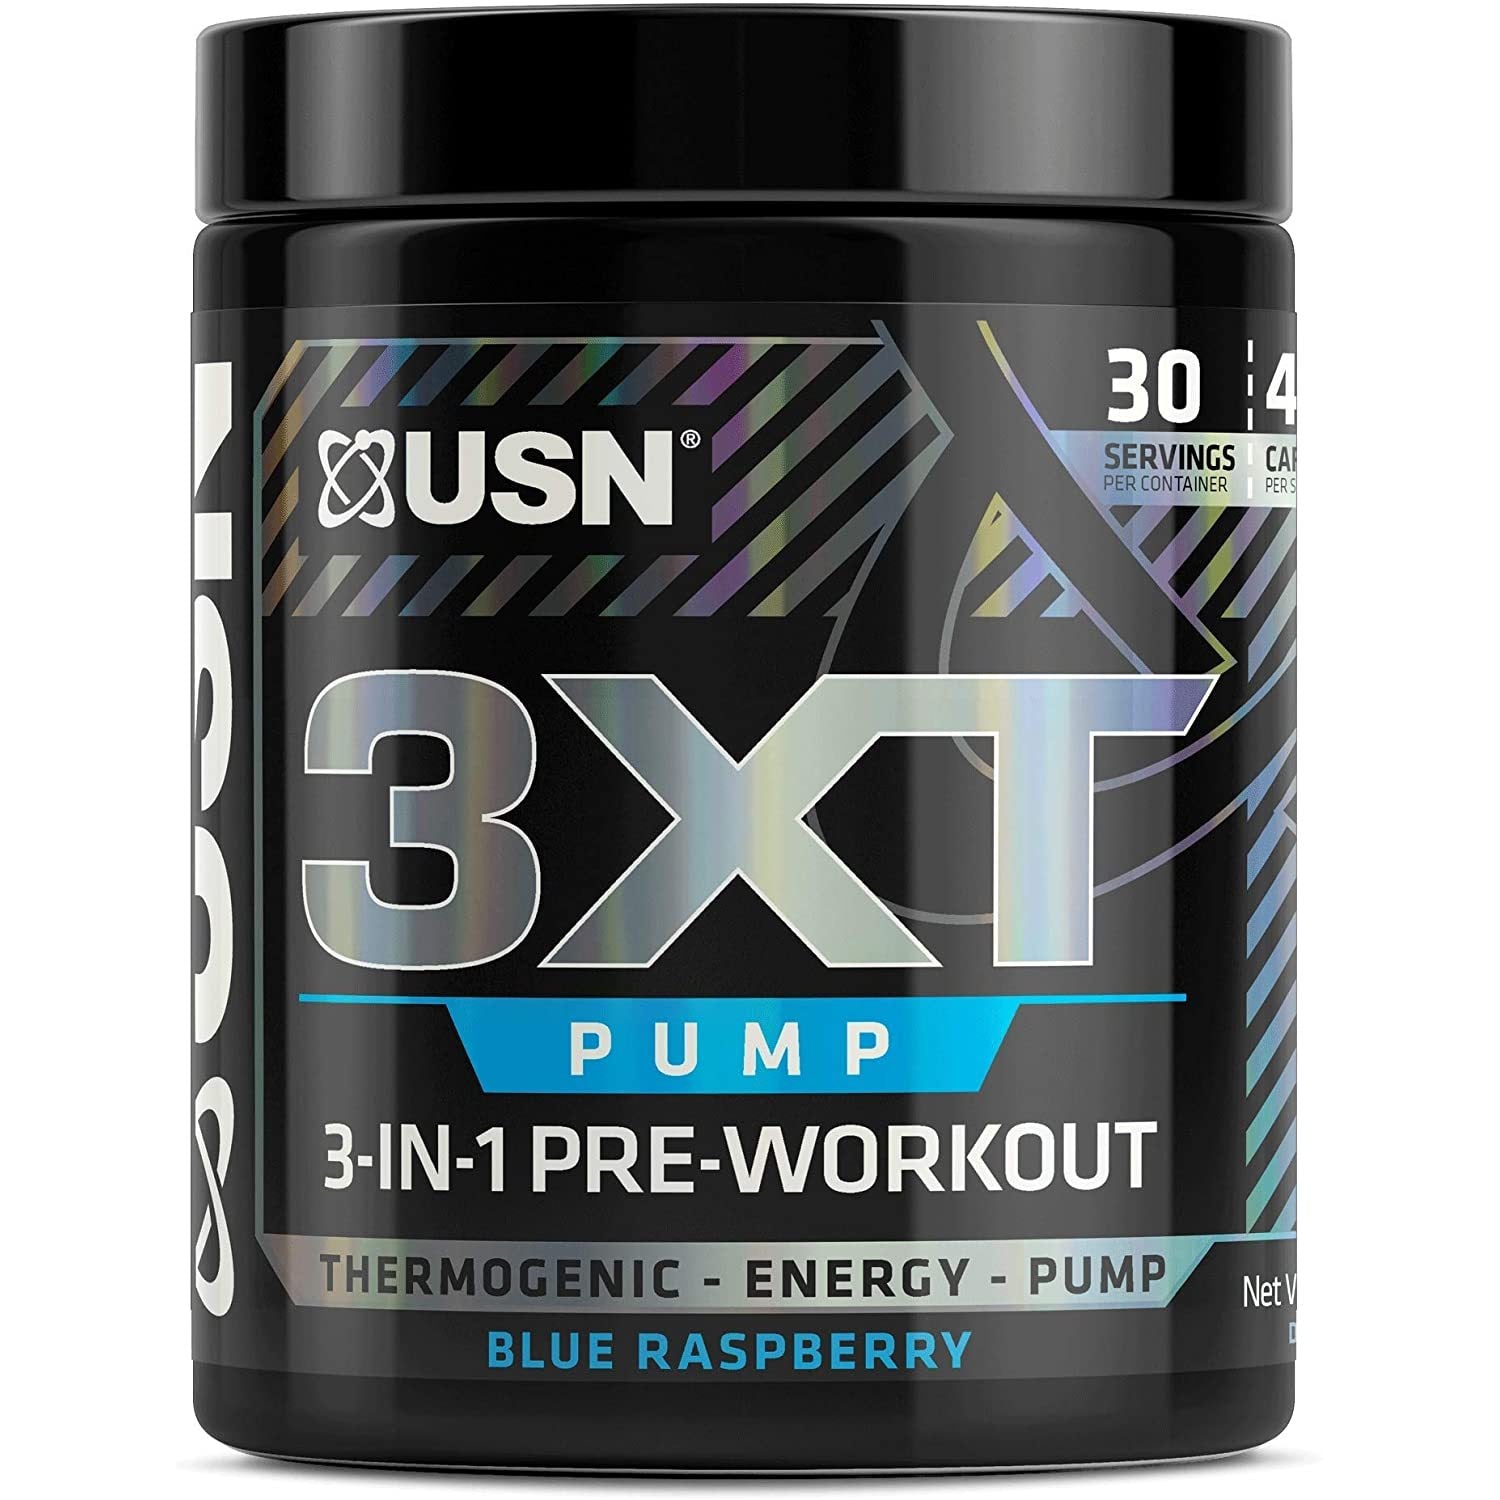 69 30 Minute Usn 3xt pre workout for Six Pack